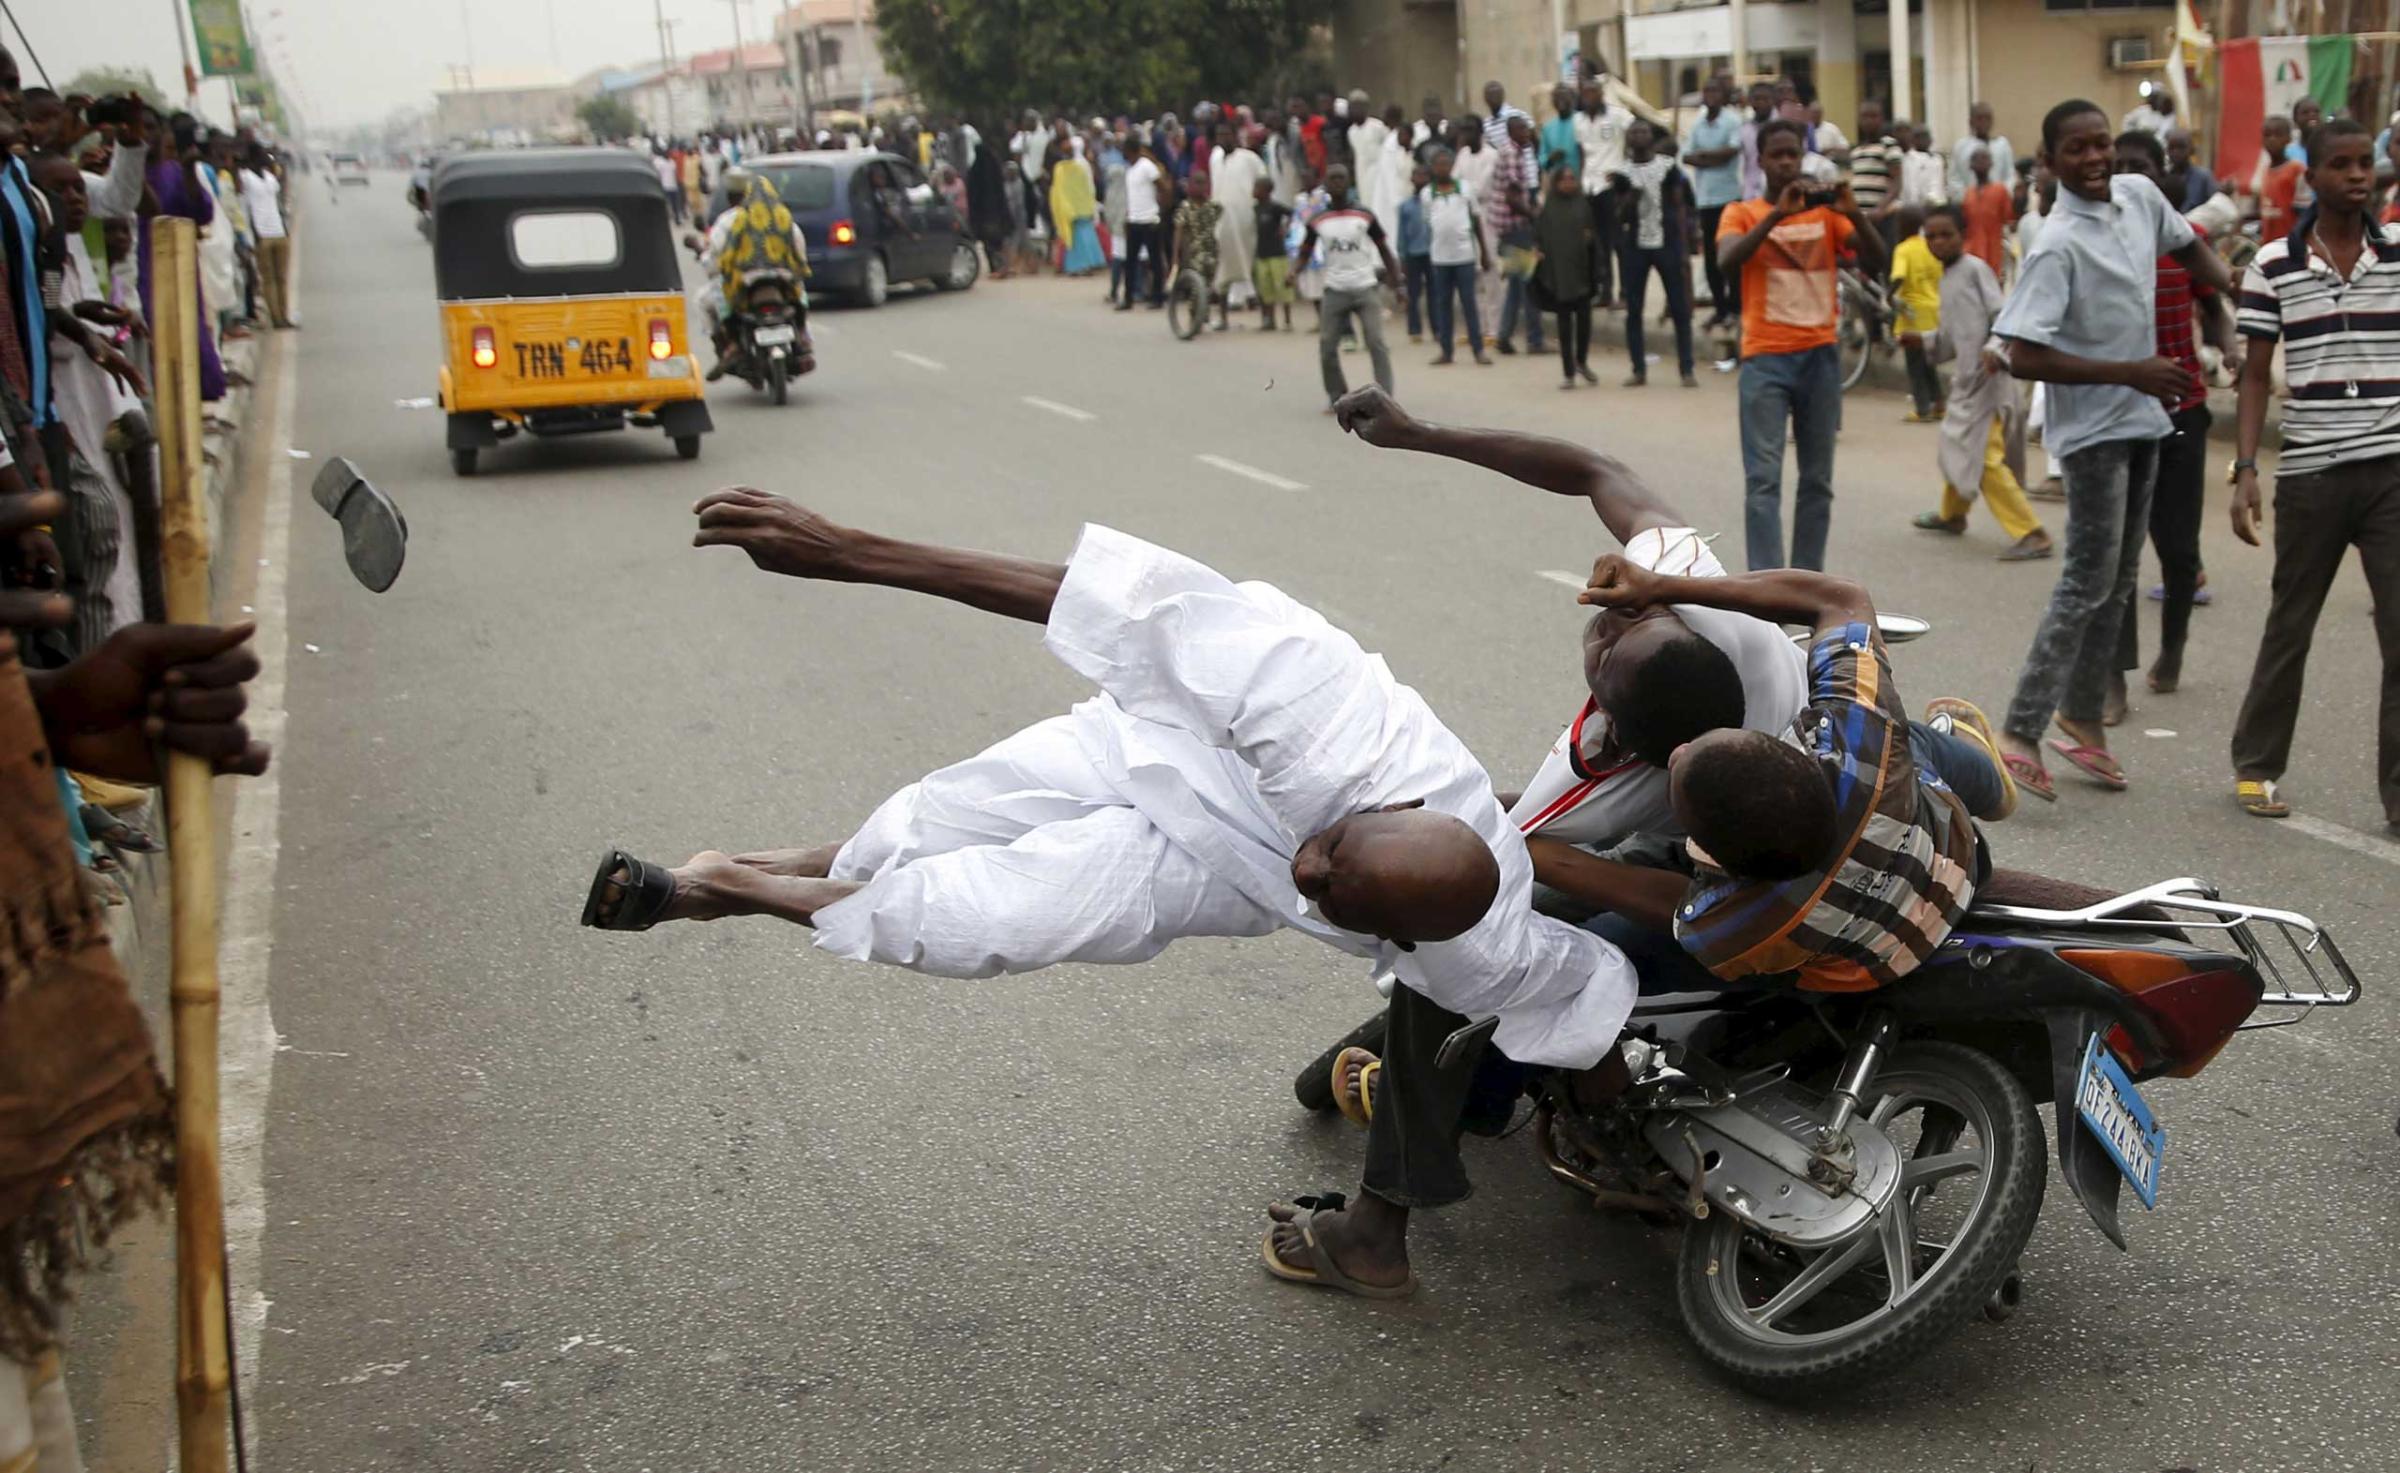 Supporters of the presidential candidate Muhammadu Buhari and his All Progressive Congress hits another supporter with a motorbike during celebrations in Kano March 31, 2015. Nigeria's opposition APC declared an election victory on Tuesday for former military ruler Buhari and said Africa's most populous nation was witnessing history with its first democratic transfer of power.